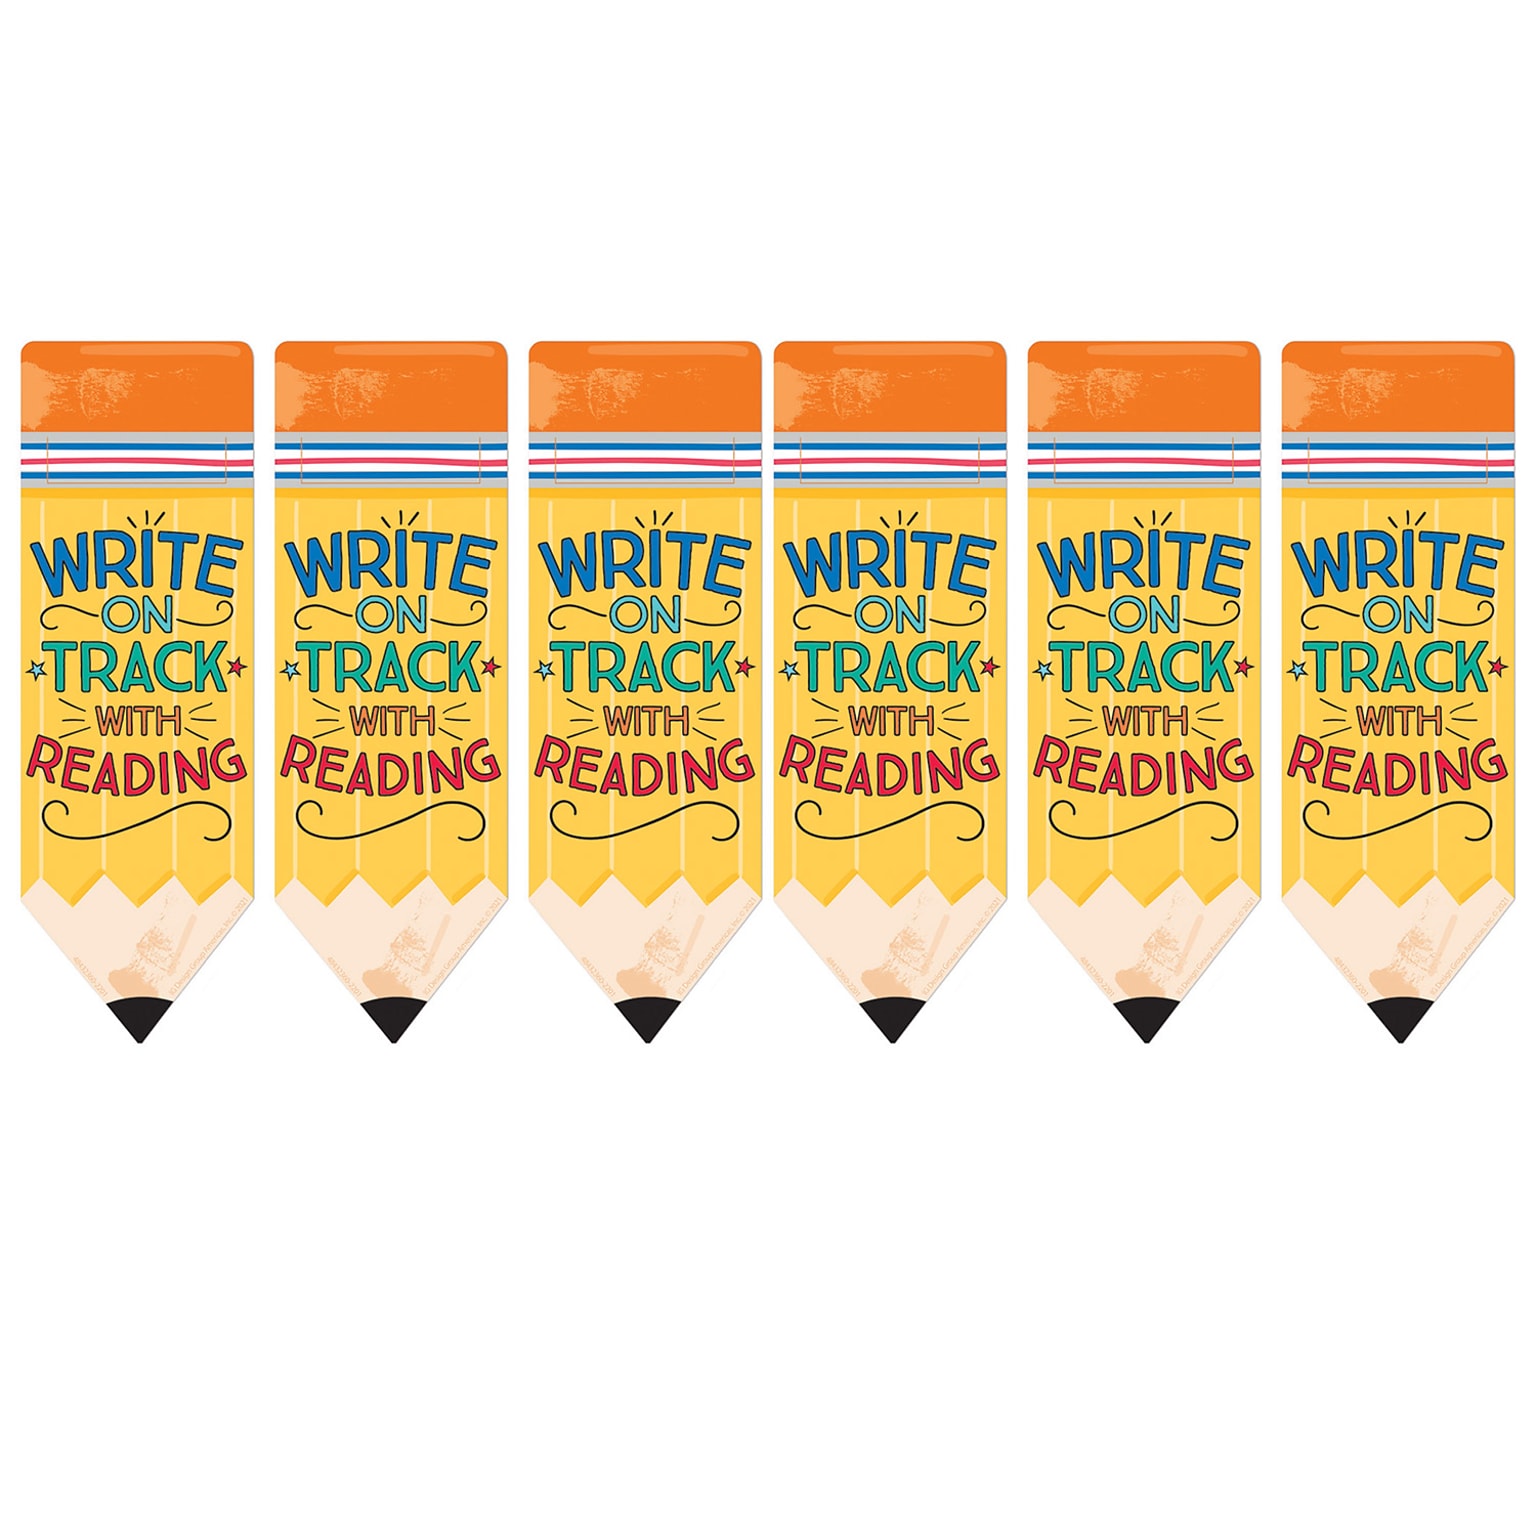 Eureka Pencil Write on Track with Reading Bookmarks, Multicolor, 36/Pack, 6 Packs/Bundle (EU-843236-6)